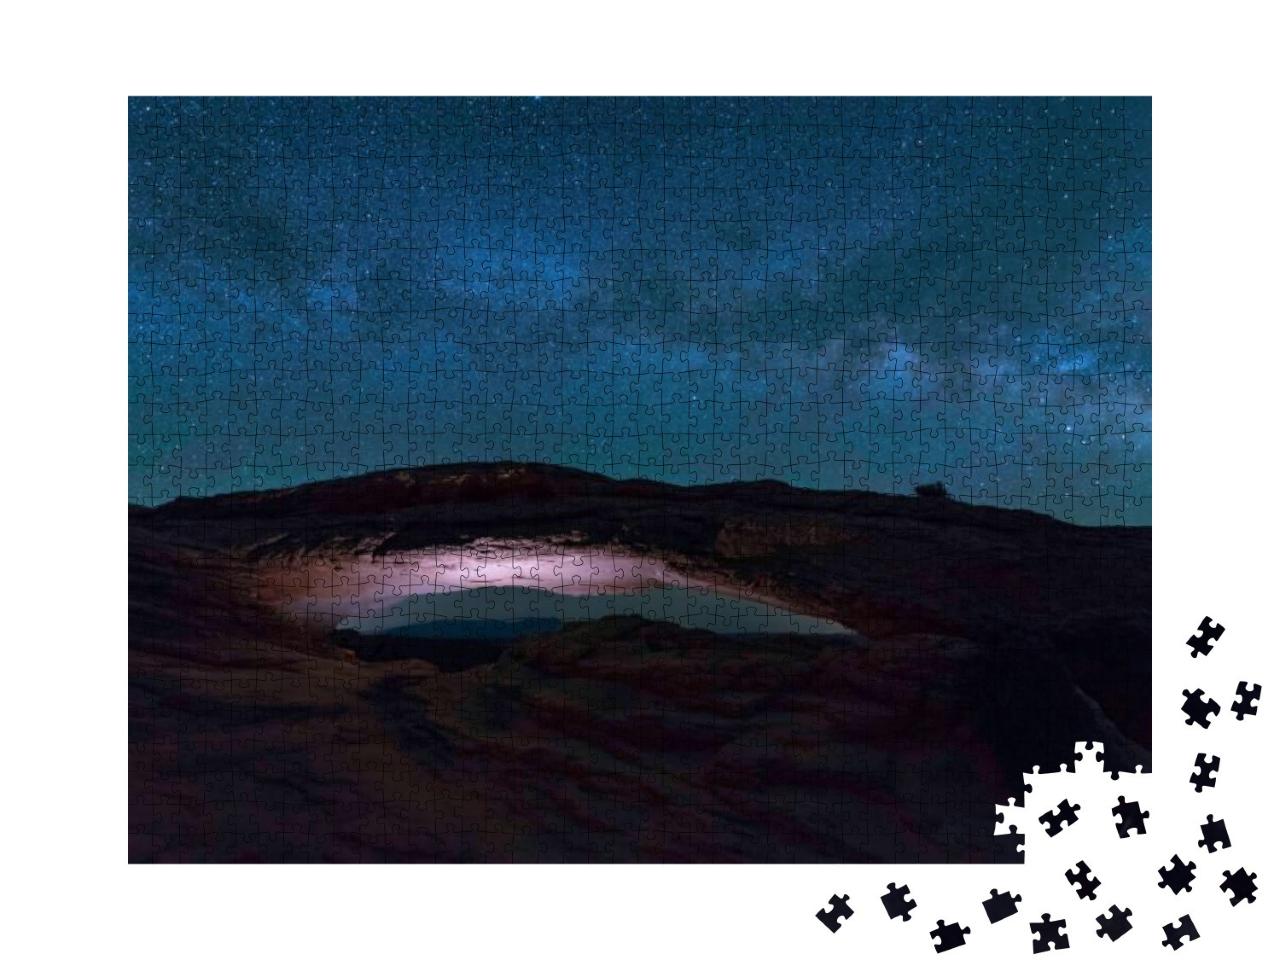 Milk Way Over Mesa Arch At Canyonlands National Park, Uta... Jigsaw Puzzle with 1000 pieces